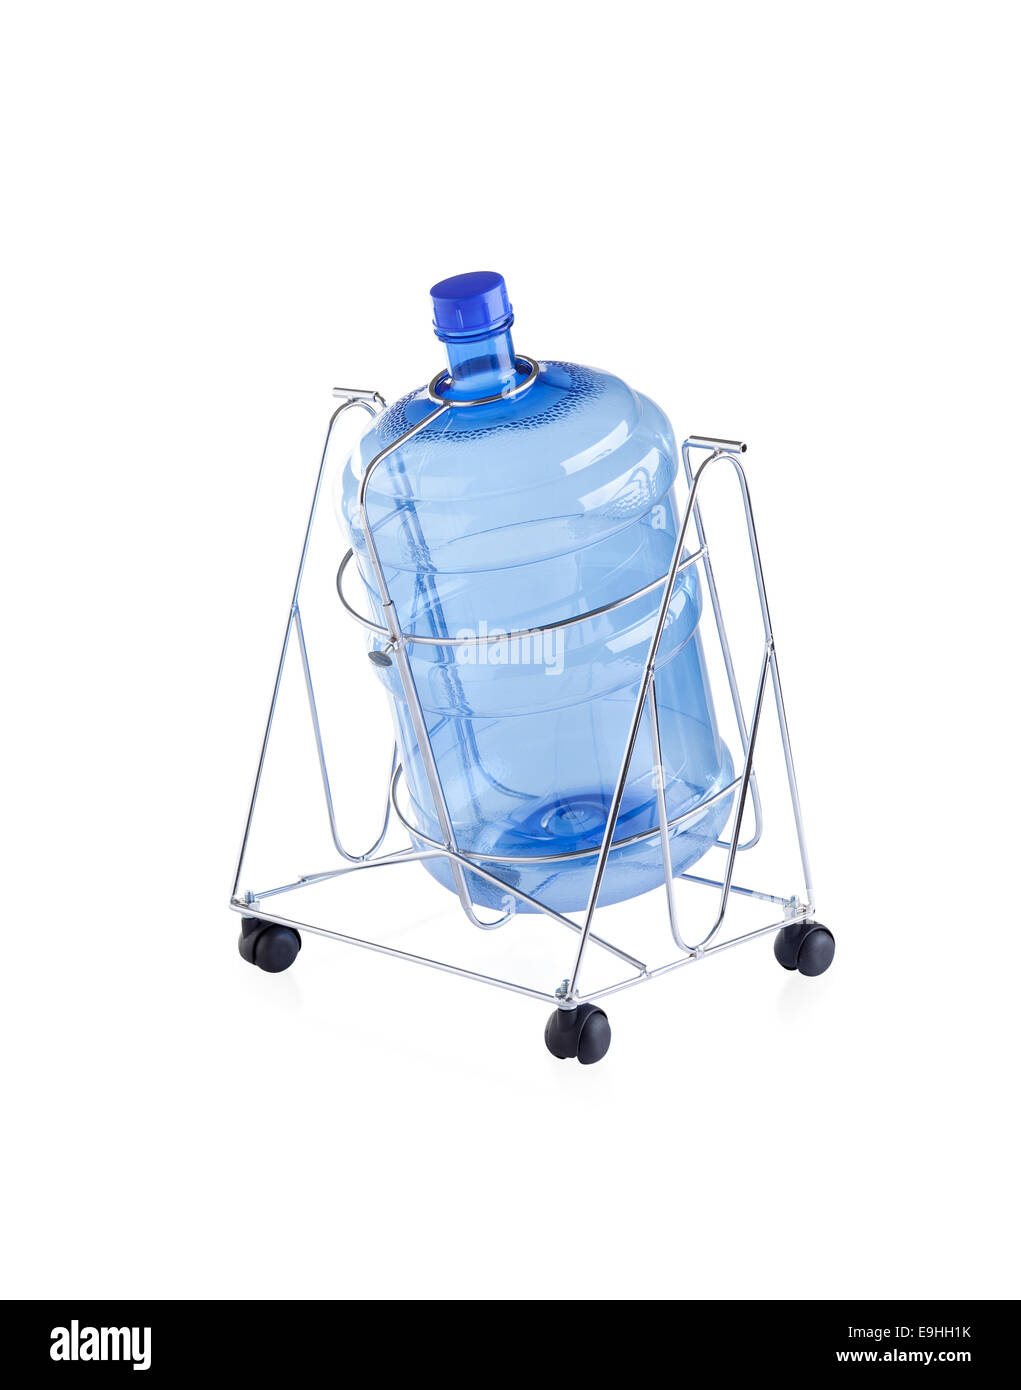 Empty water bottle on steel stand with wheels isolated on white Stock Photo